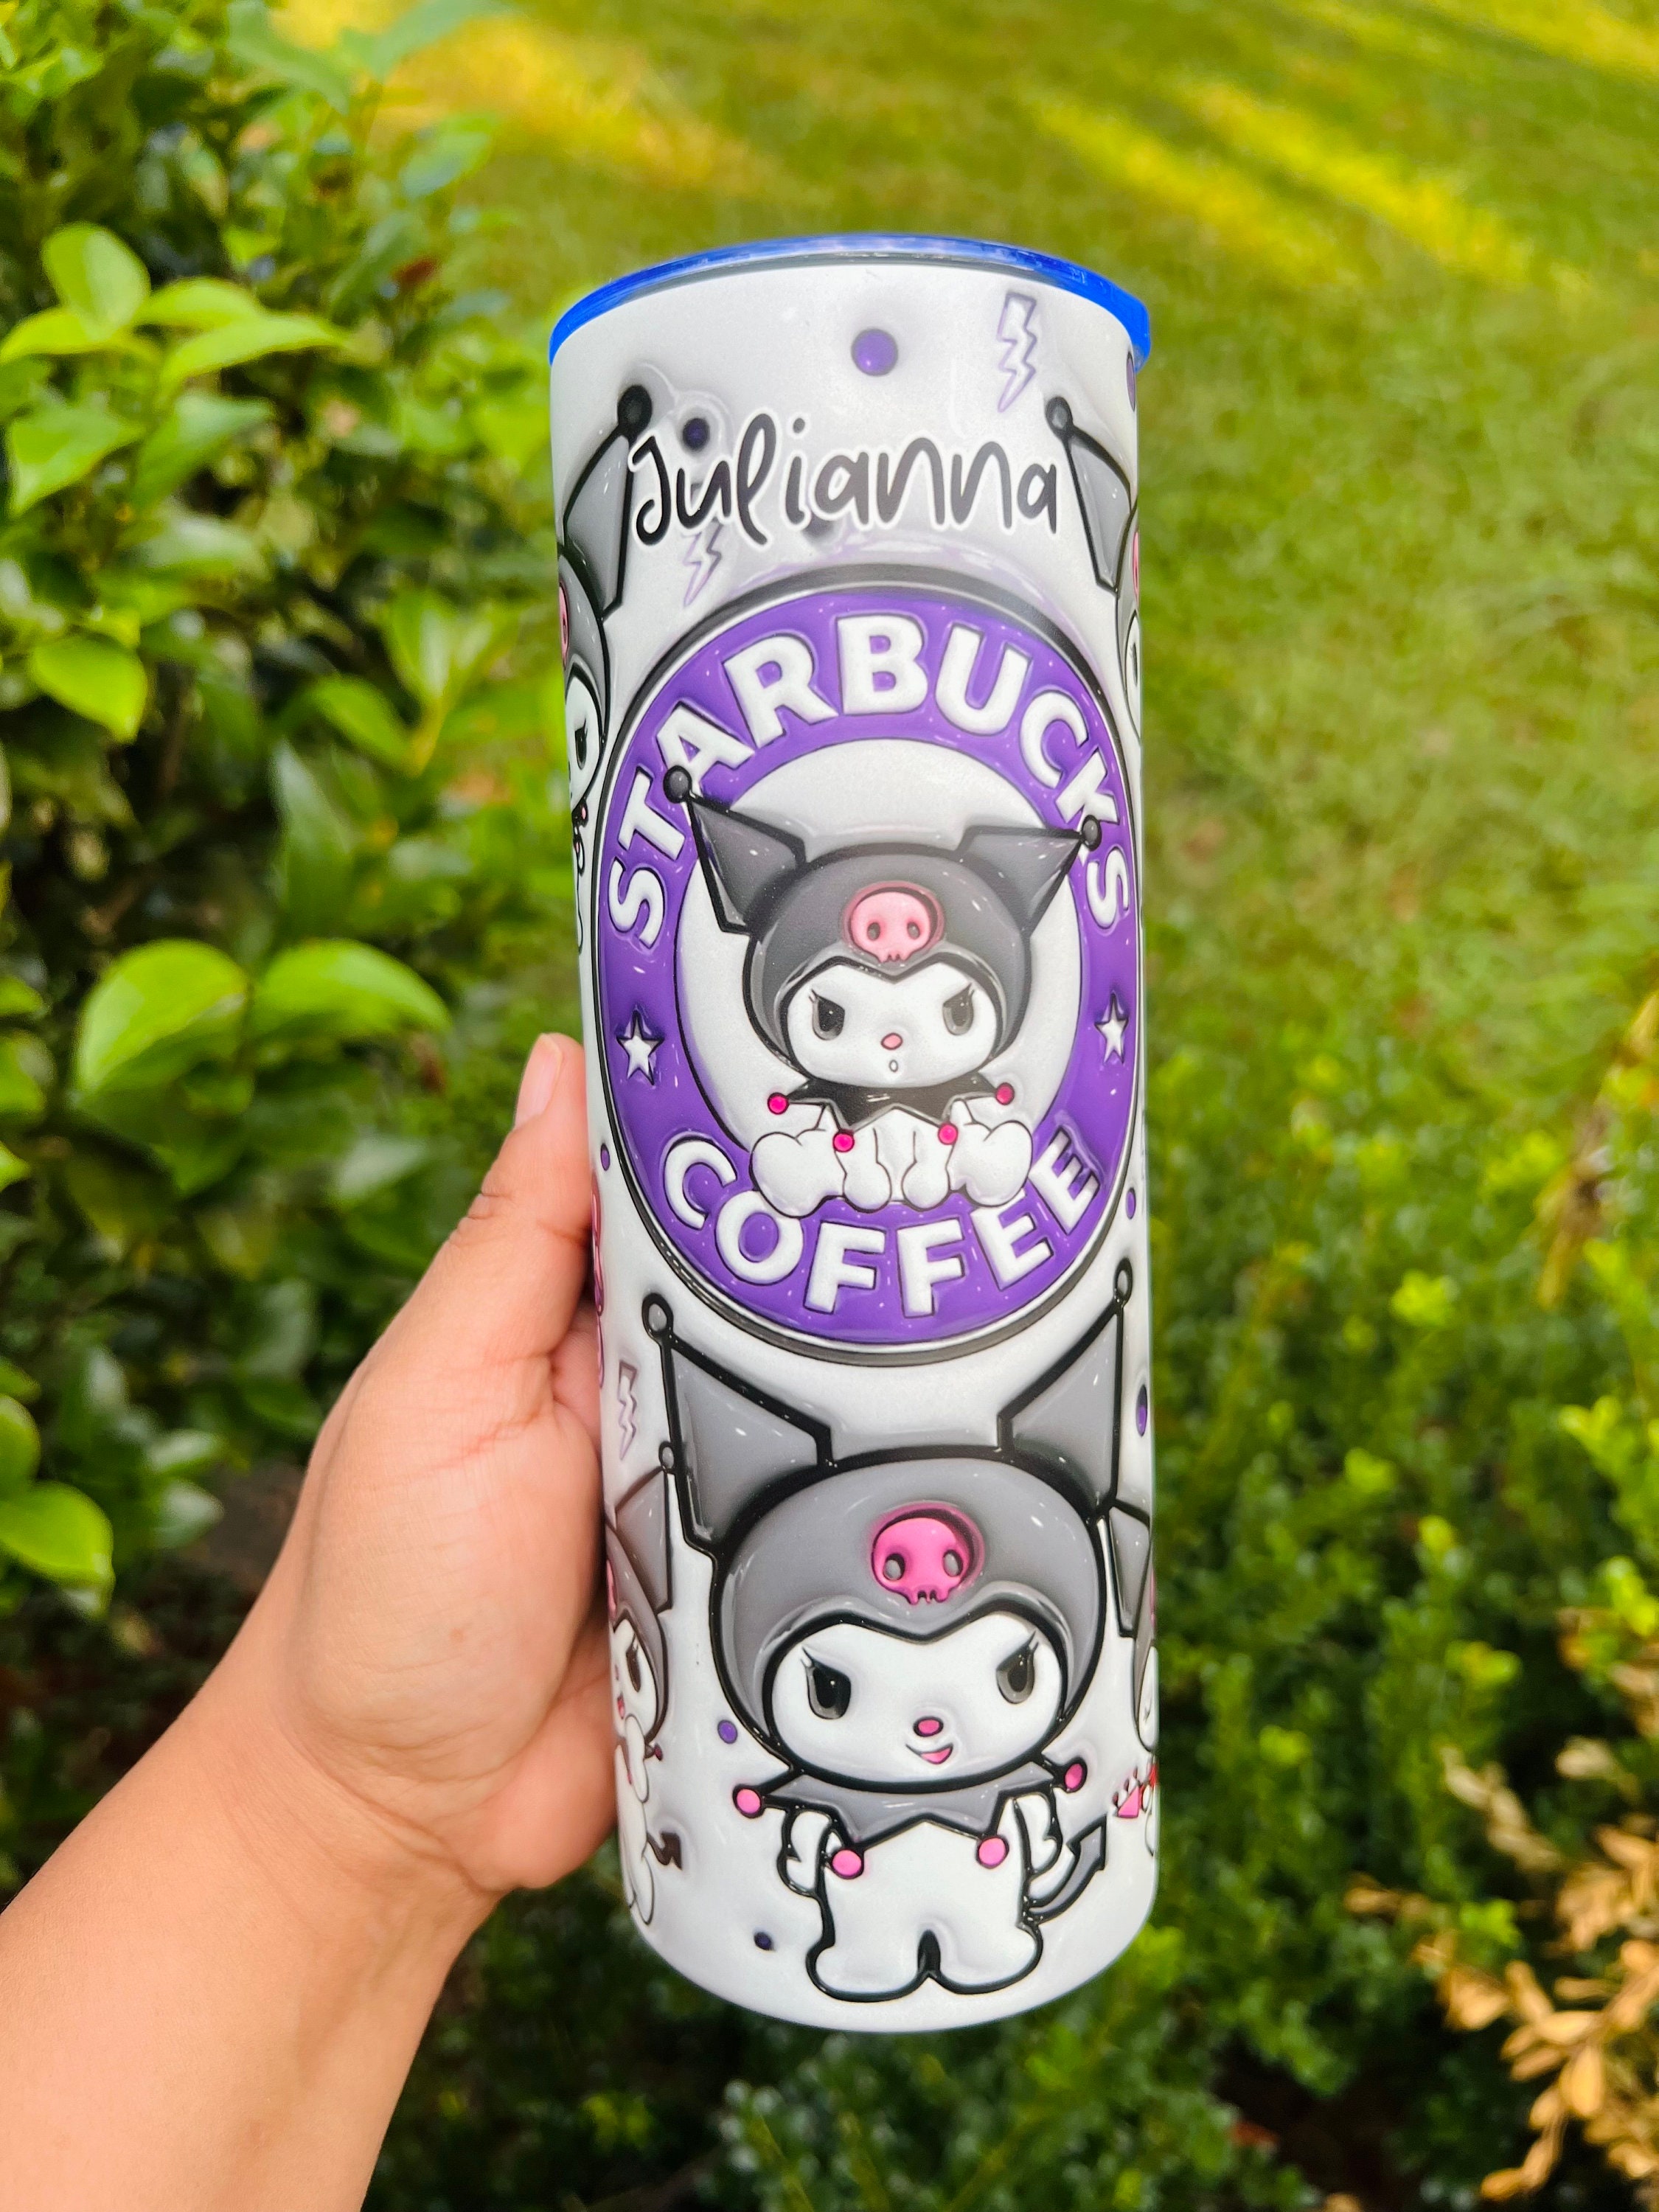 Black Kitty Glow in the Dark Personalized Tumbler for Girls